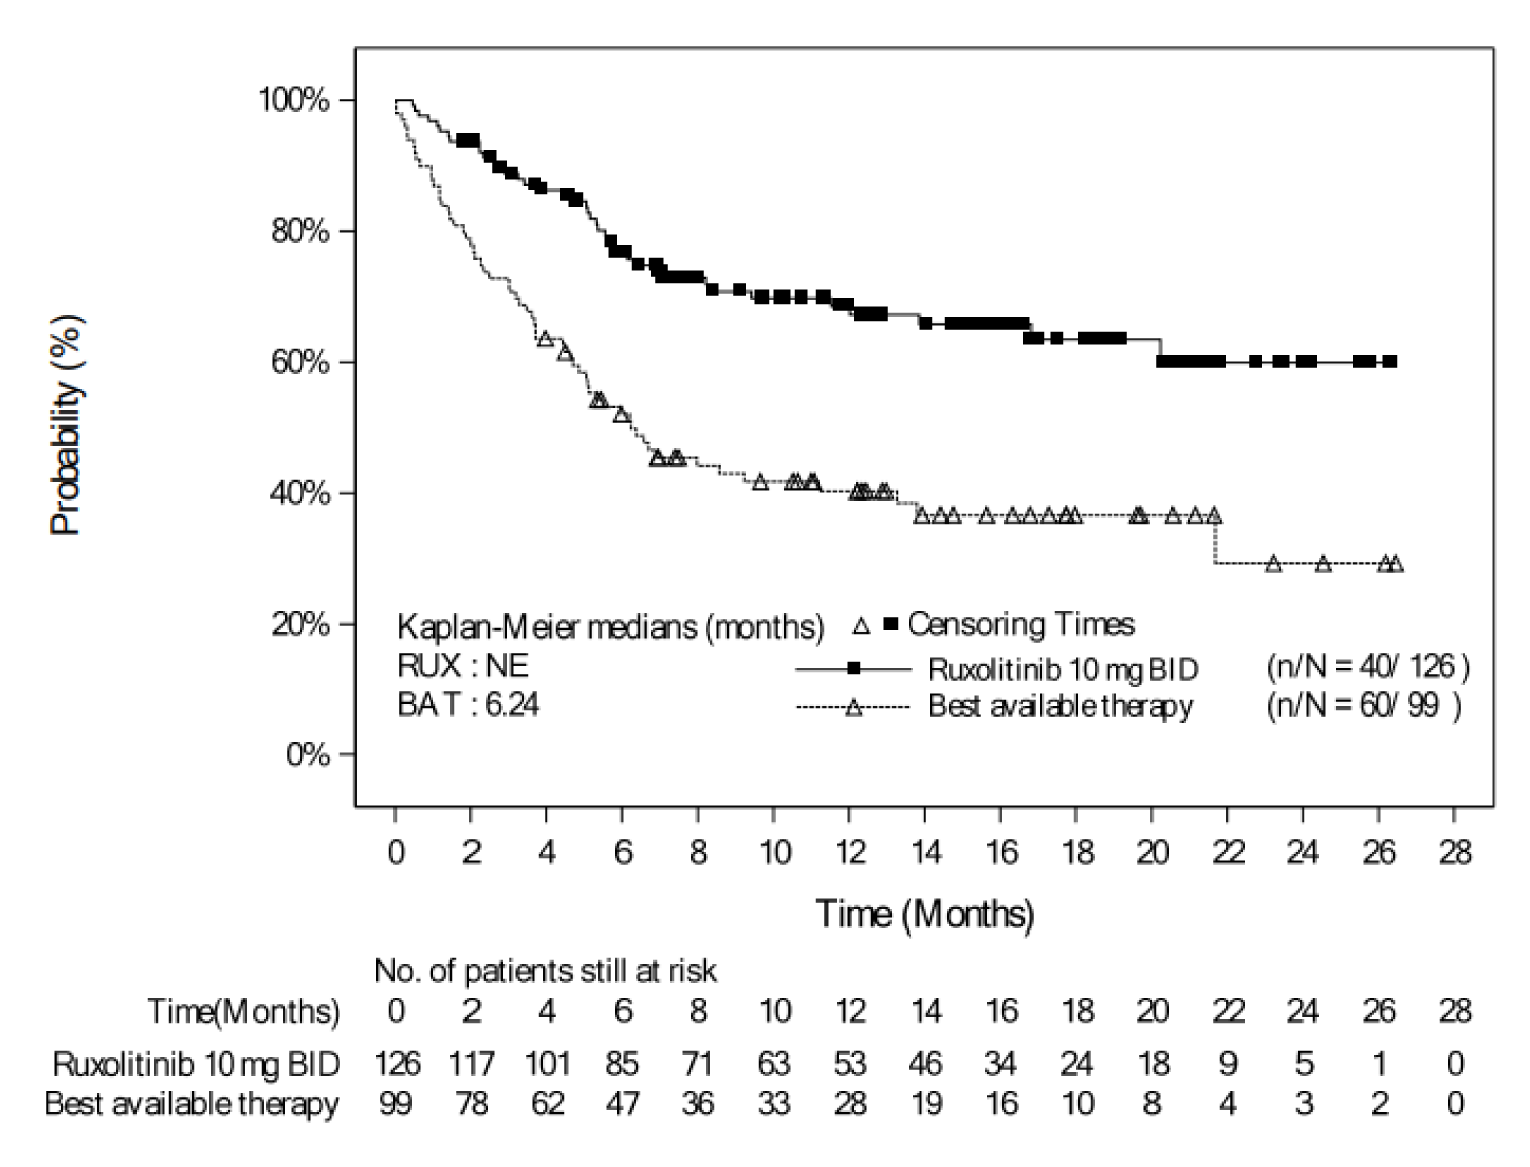 Line graph depicting the duration of response in the ruxolitinib and best available therapy arms over the trial period, where duration of response decreases faster, so at 6 months about 45% remain responders compared to about 75% in the ruxolitinib arm.